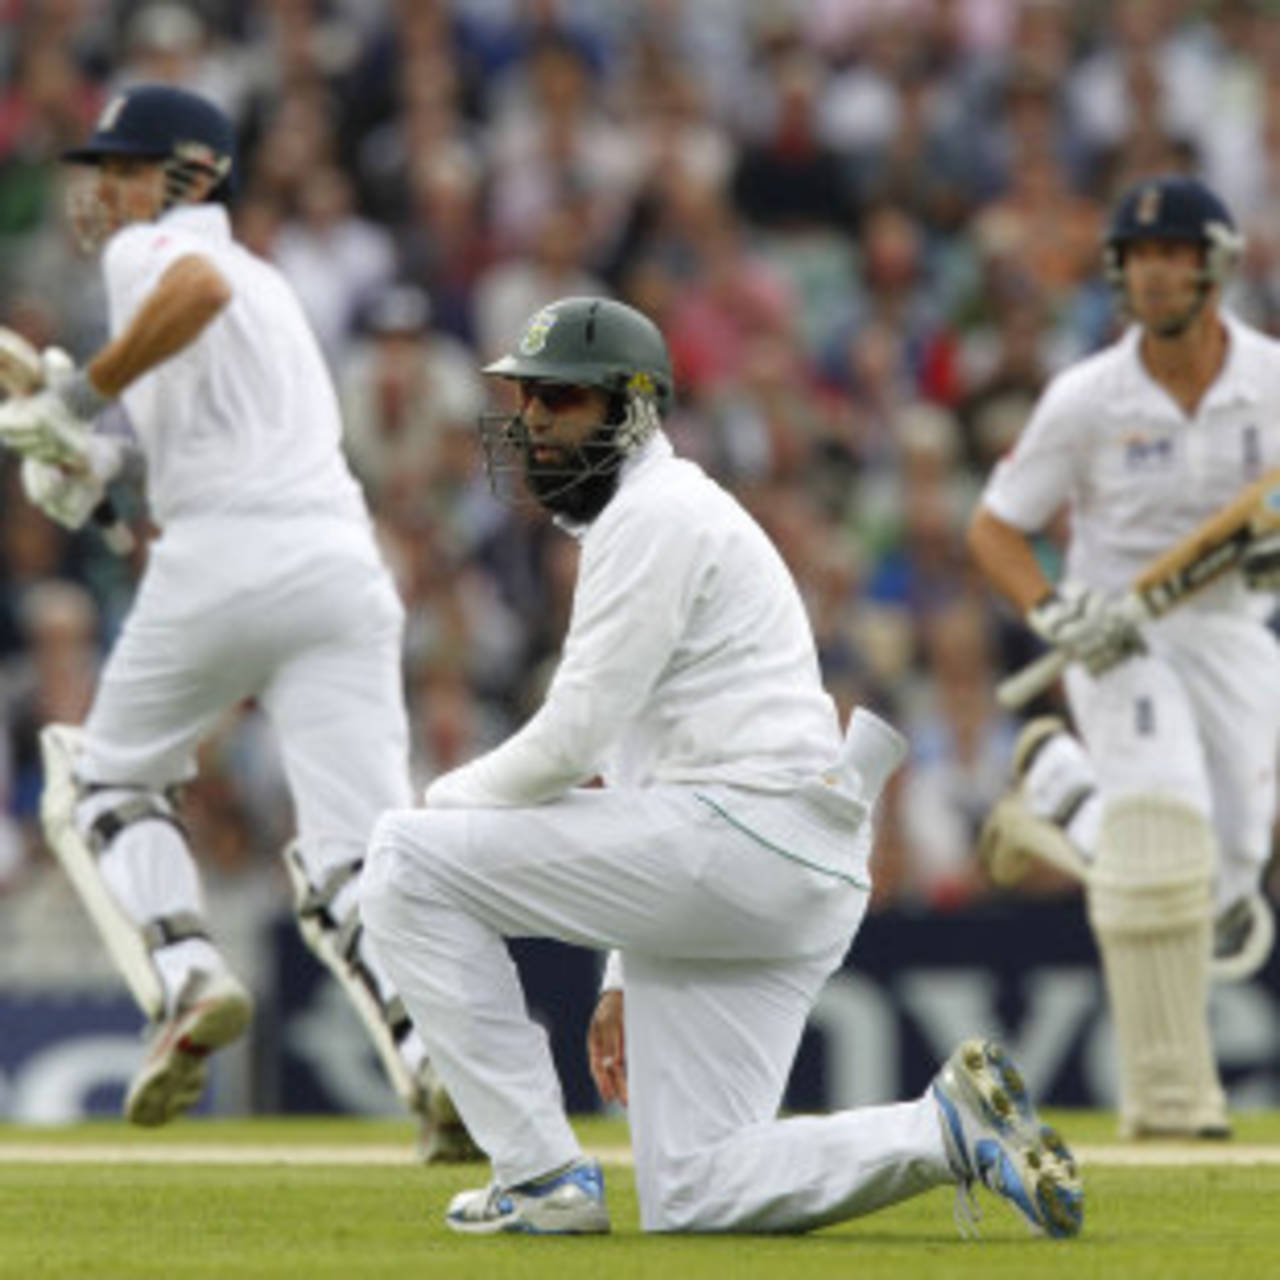 Hashim Amla looks on as Alastair Cook and Jonathan Trott take a run, England v South Africa, 1st Investec Test, The Oval, 1st day, July 19, 2012